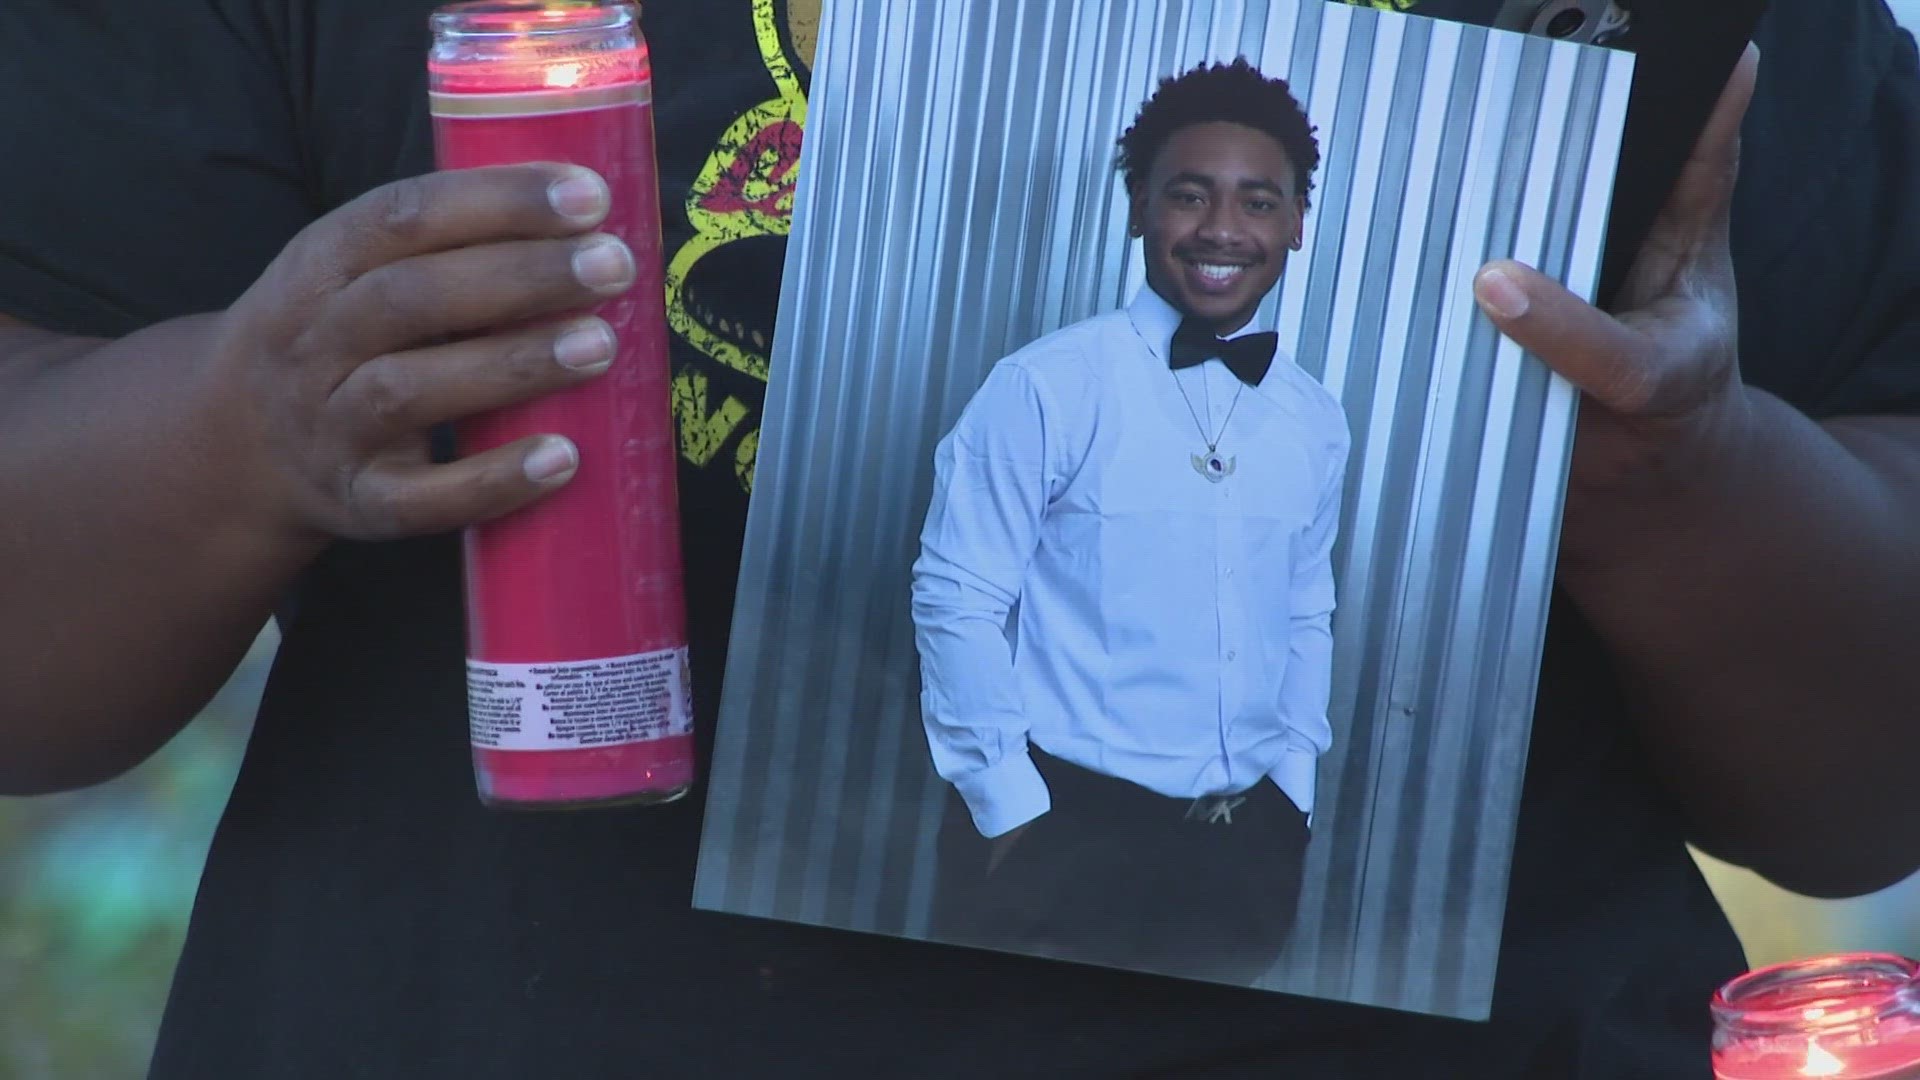 Loved ones came together Friday night a Lake Pleasant to remember Jovanni Thomas Padilla - a life lost too soon.